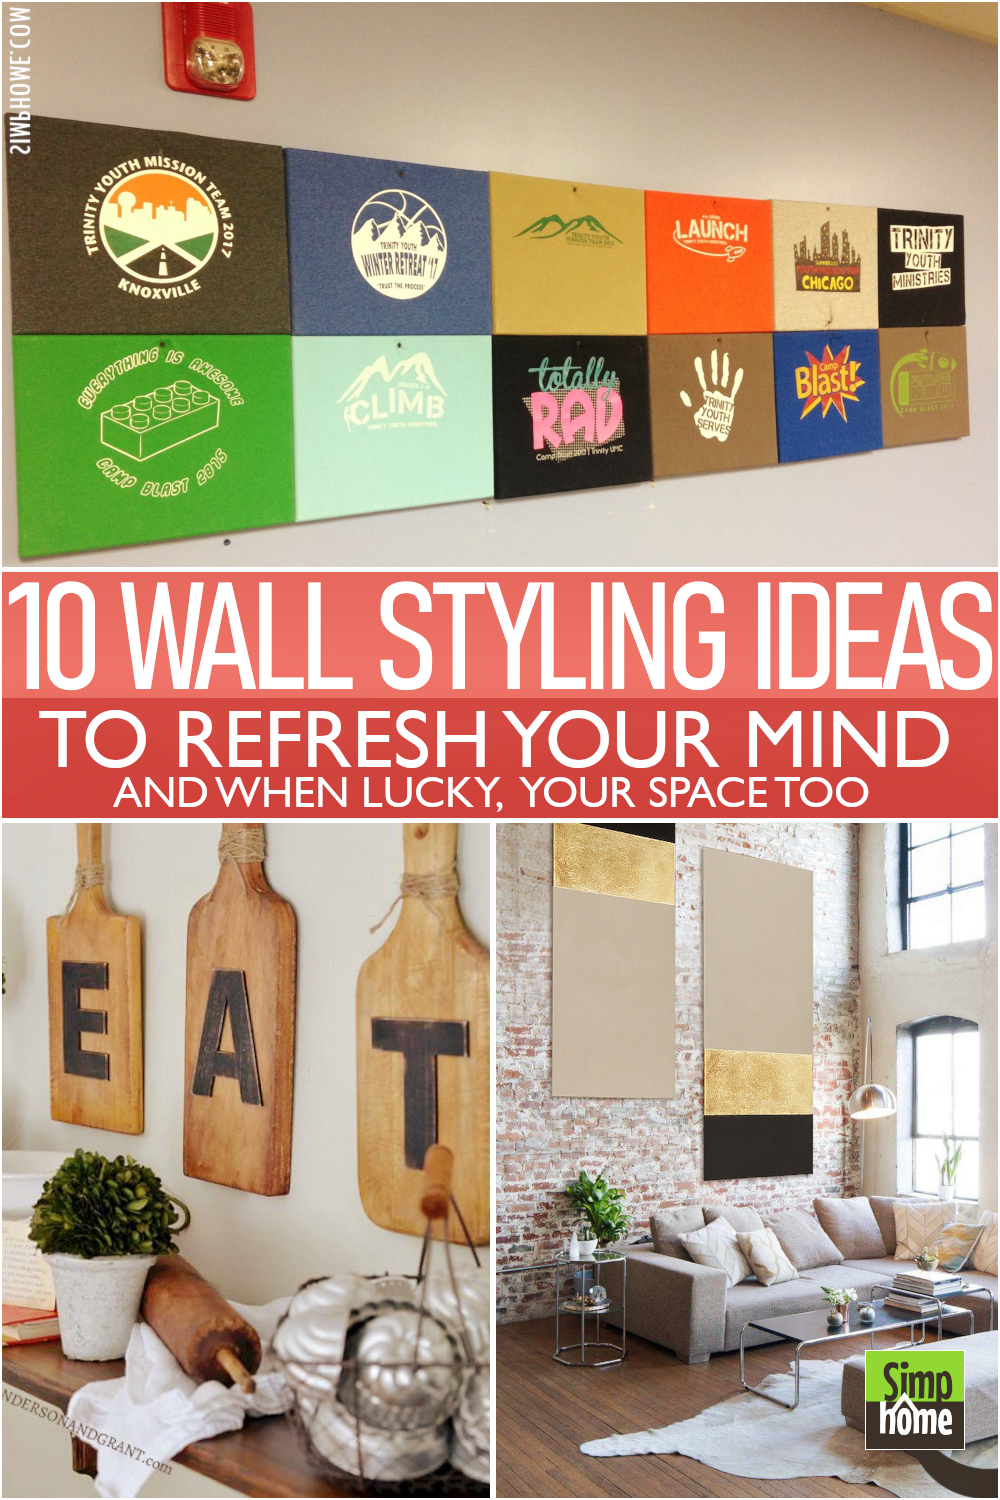 10 Wall styling ideas refresh your mood and space